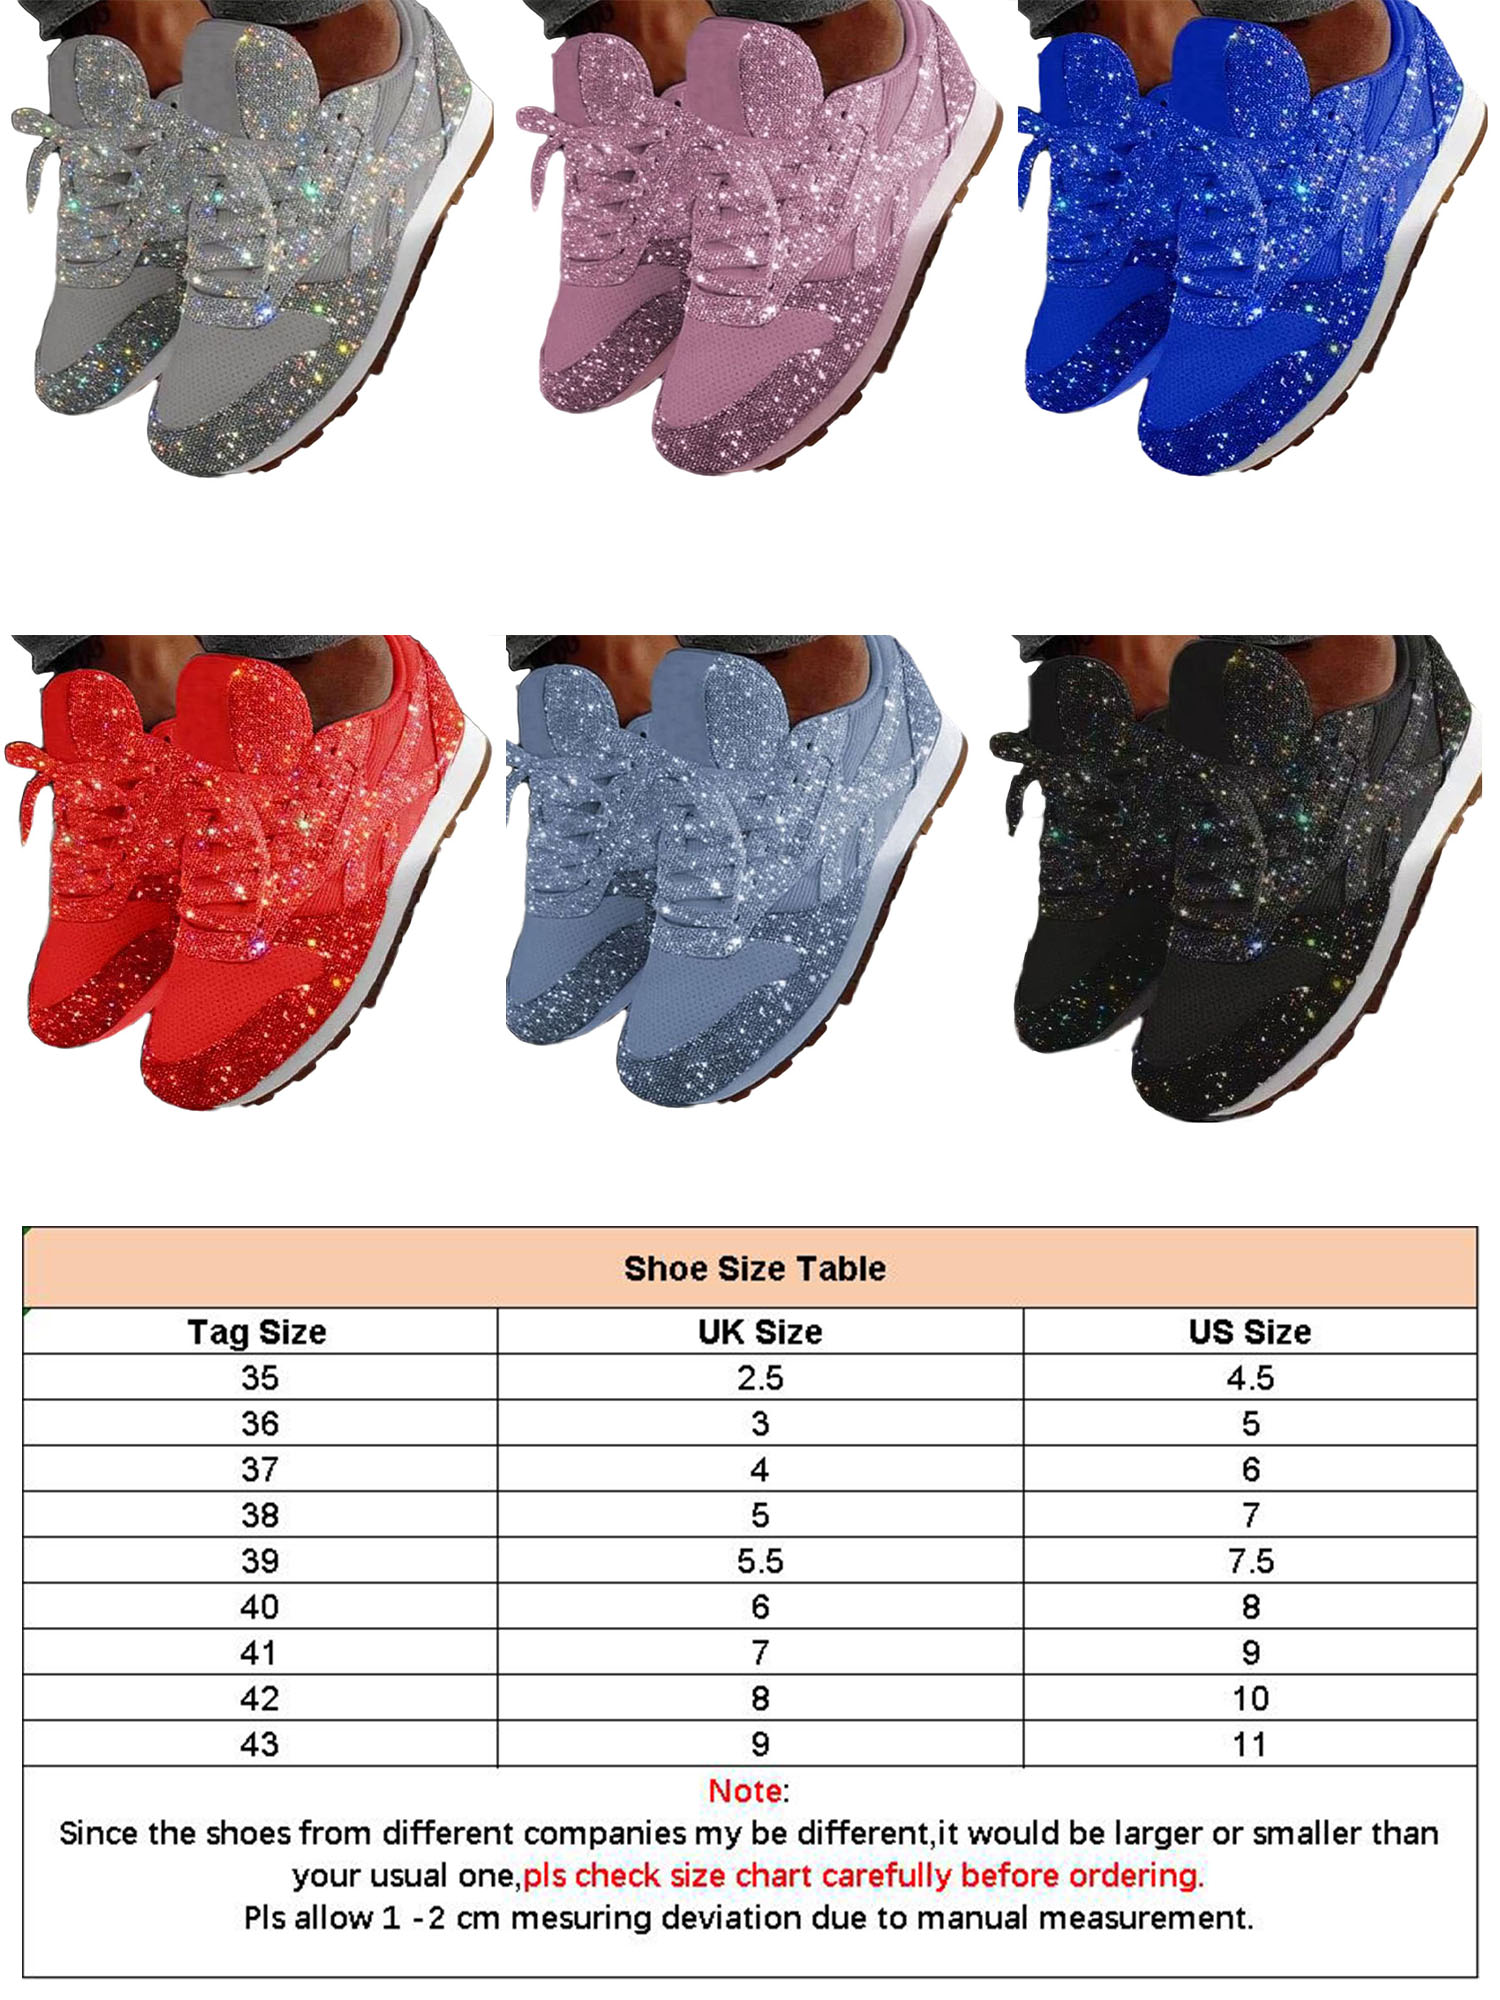 Avamo Shiny Light Low Top Sneakers for Women Teen Girls Fashion Lace up Shoes Casual School walking shoes - image 2 of 2